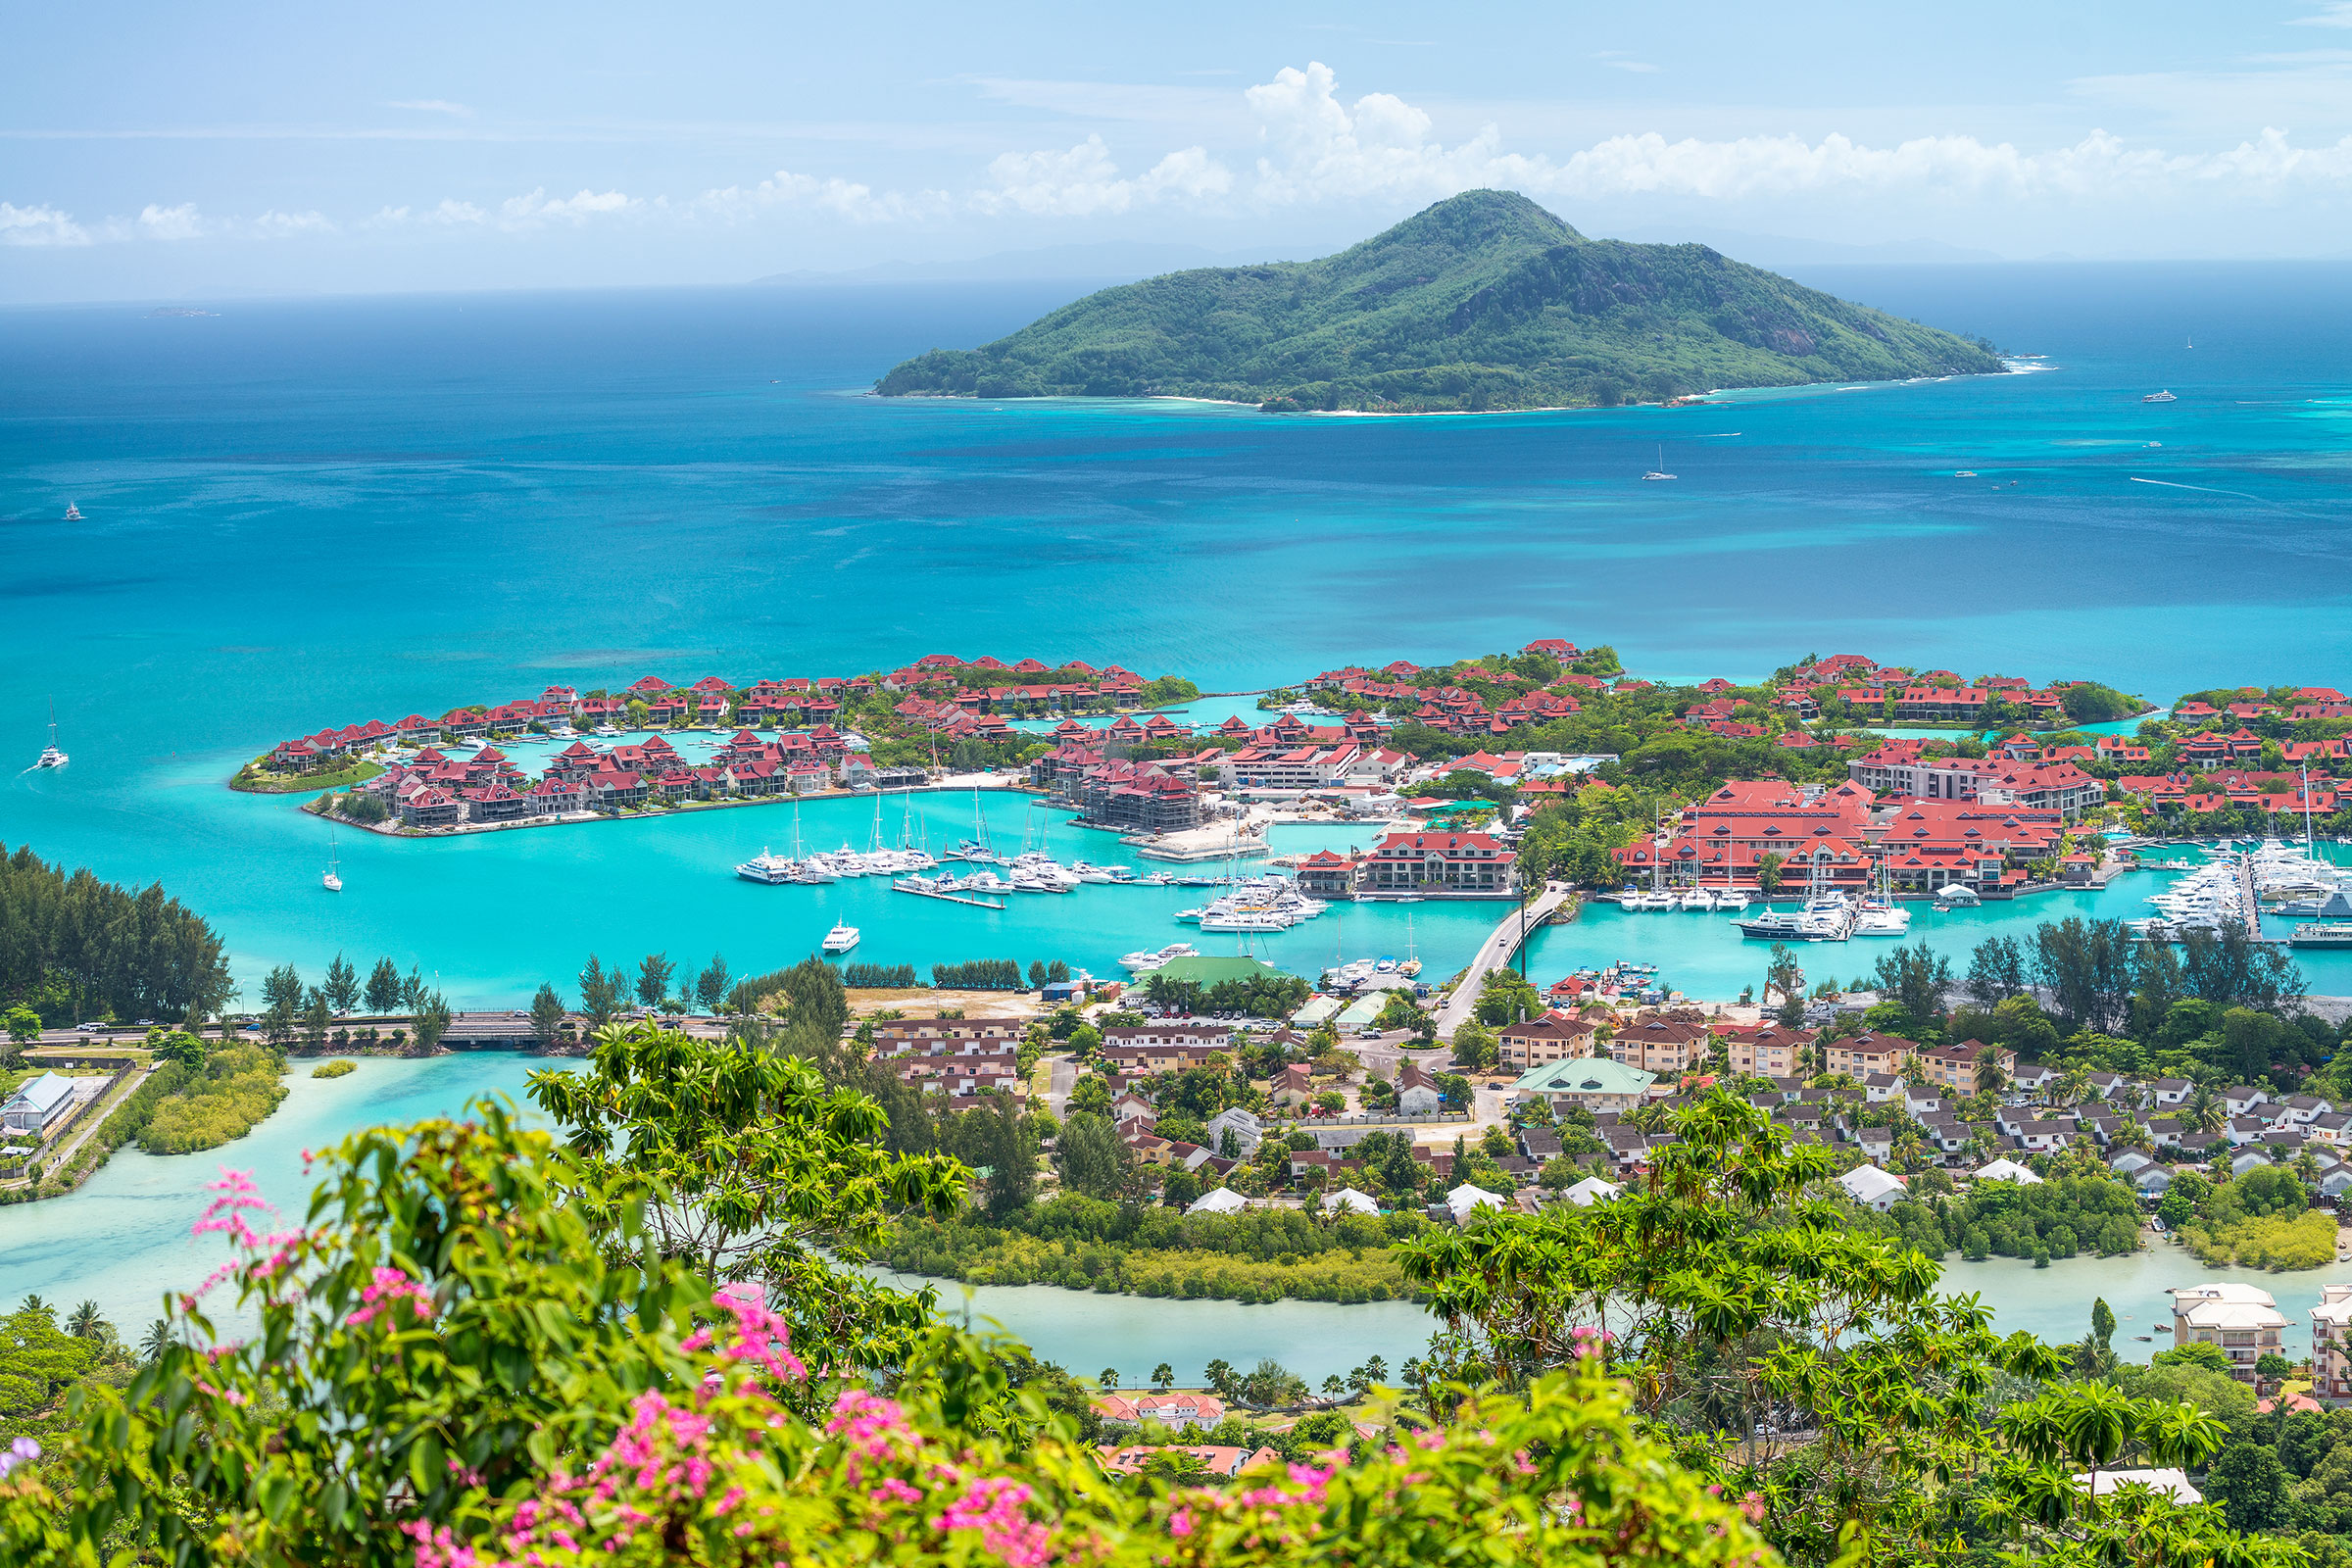  Red Roofs of Eden Island, Aerial View of Seychelles.